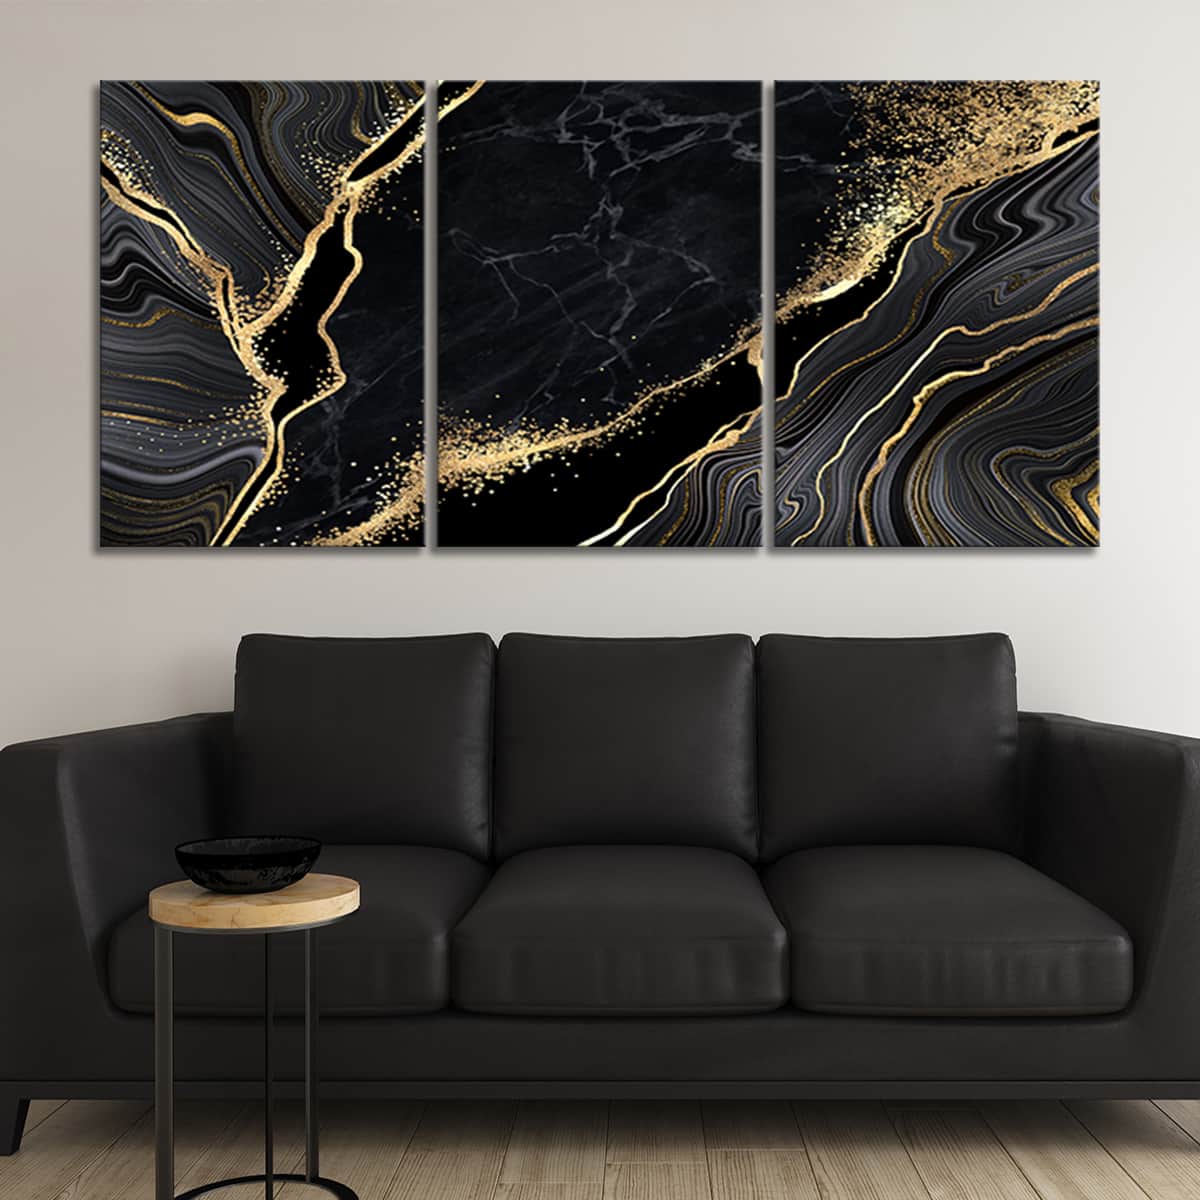 Black wall art of abstract marble with gold accents on a large canvas above a contemporary grey couch with white throw pillows.